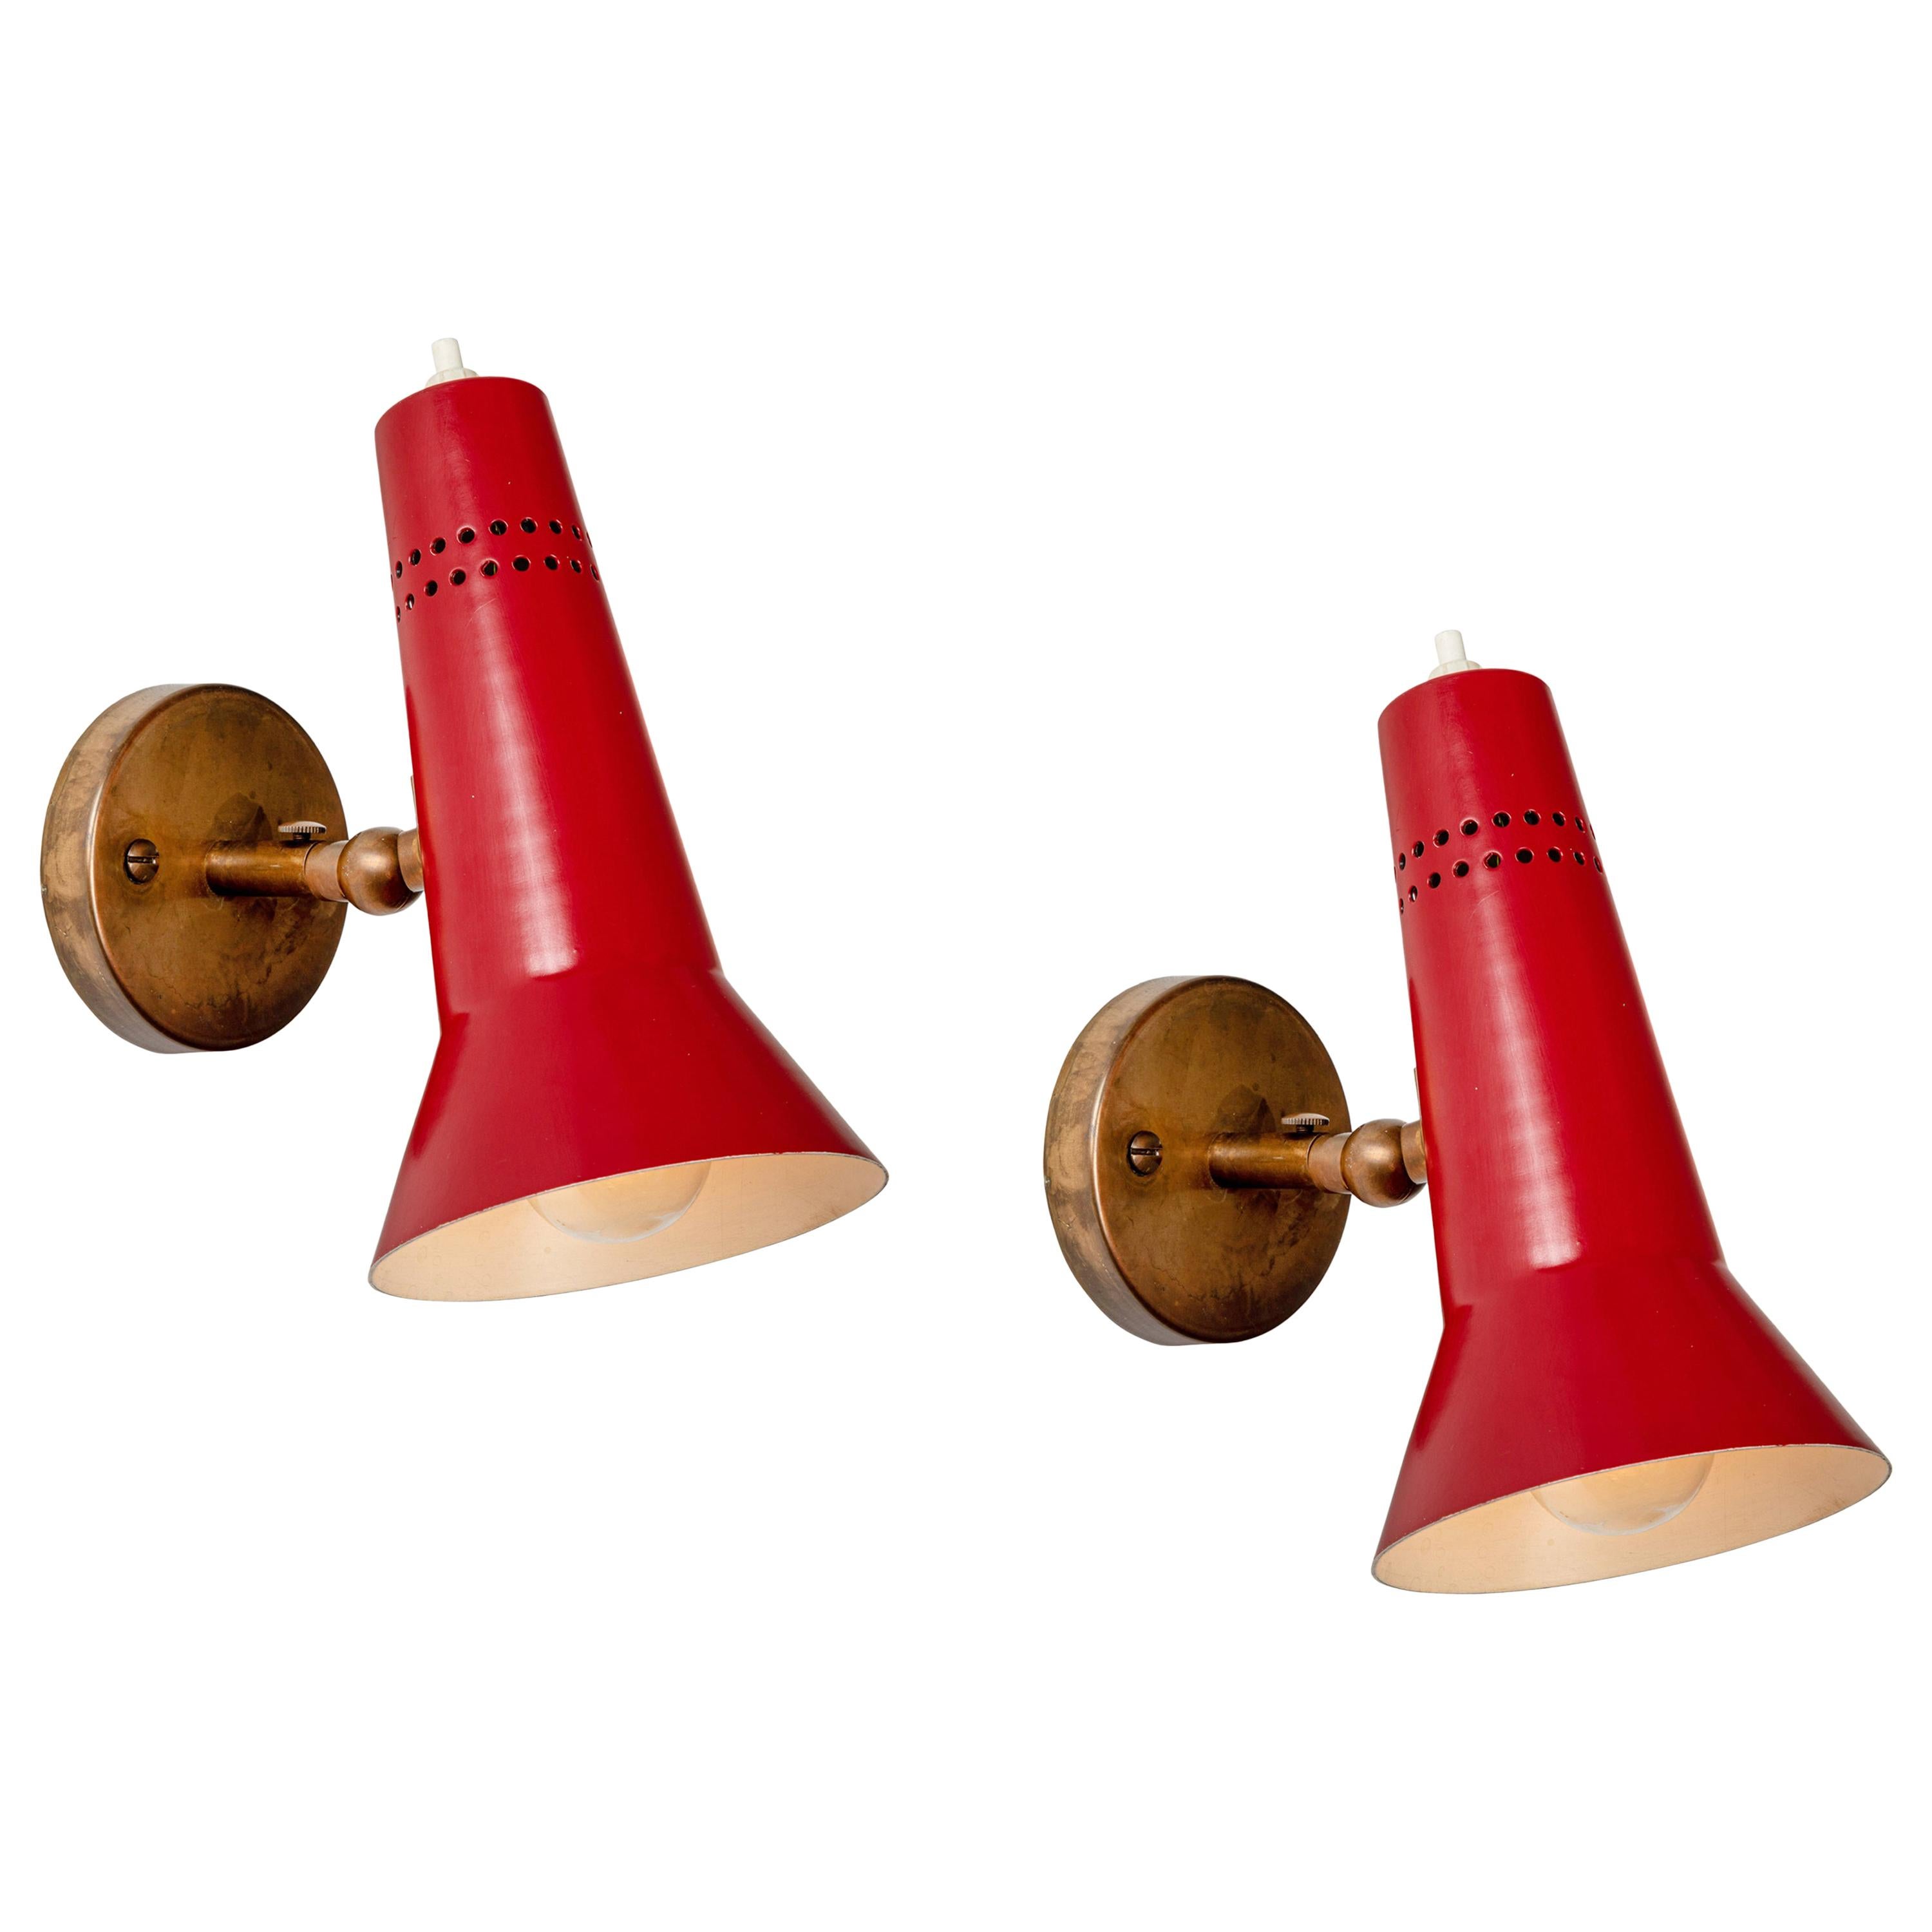 Pair of Gino Sarfatti Model #21 Red Perforated Sconces for Arteluce, circa 1955 For Sale